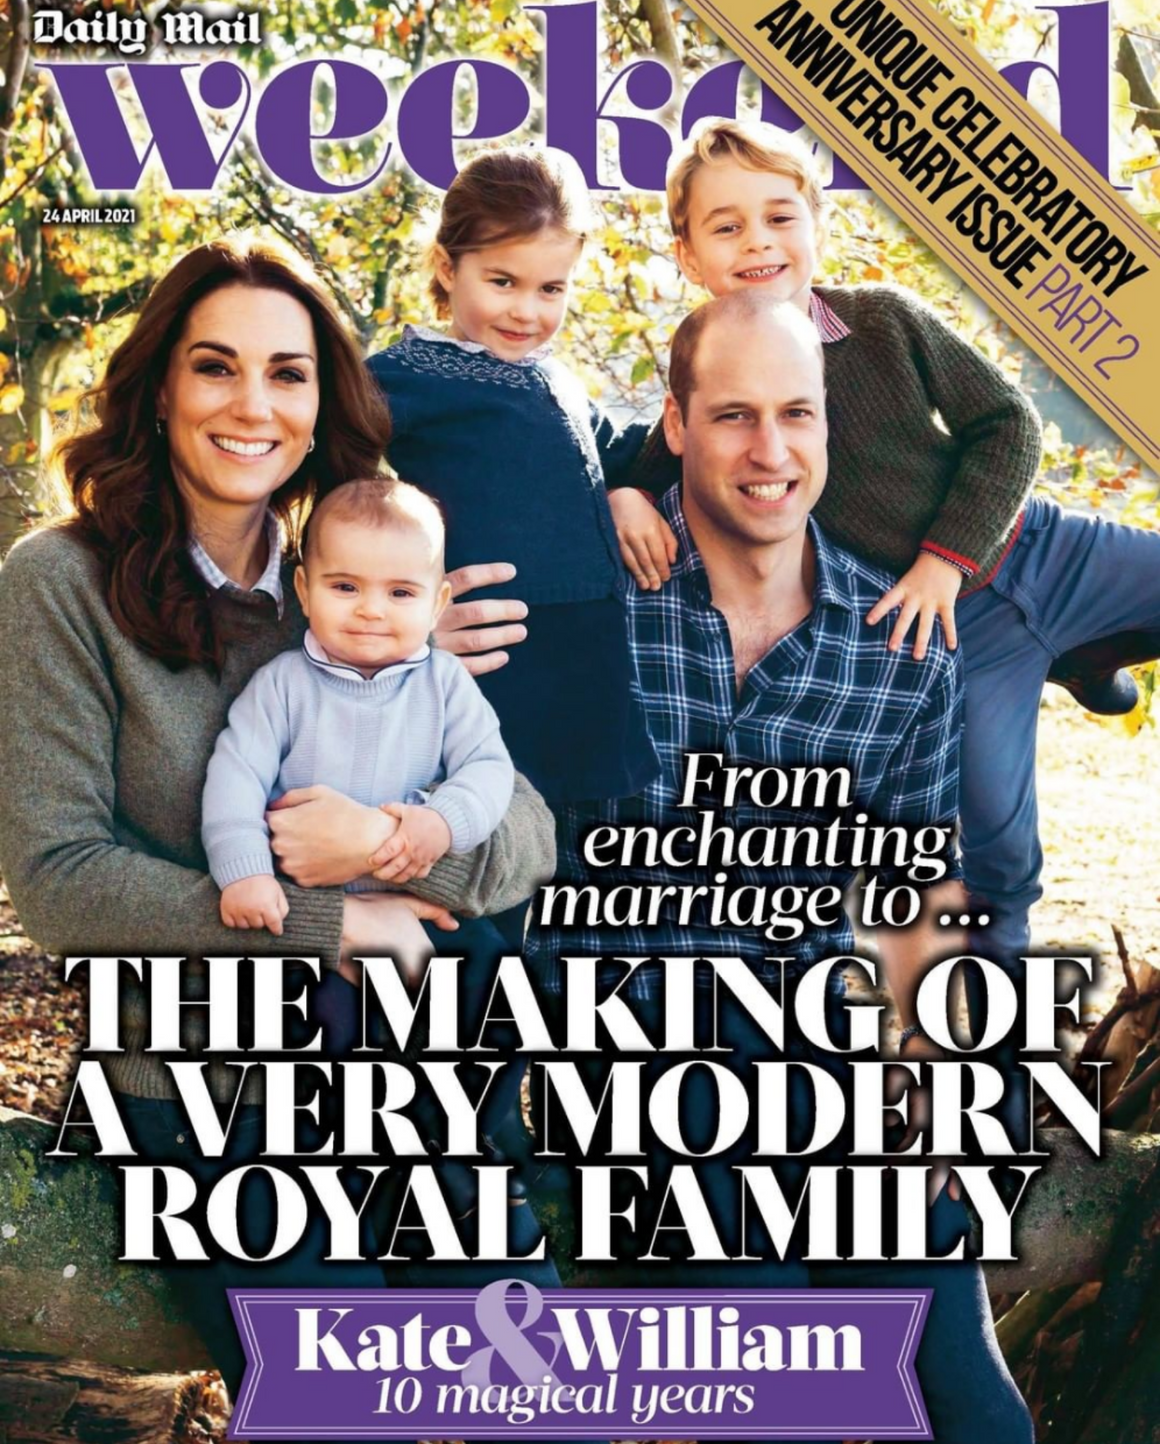 WEEKEND Magazine April 24 2021: Prince William & Kate Middleton - 10 Magical Years Part 2